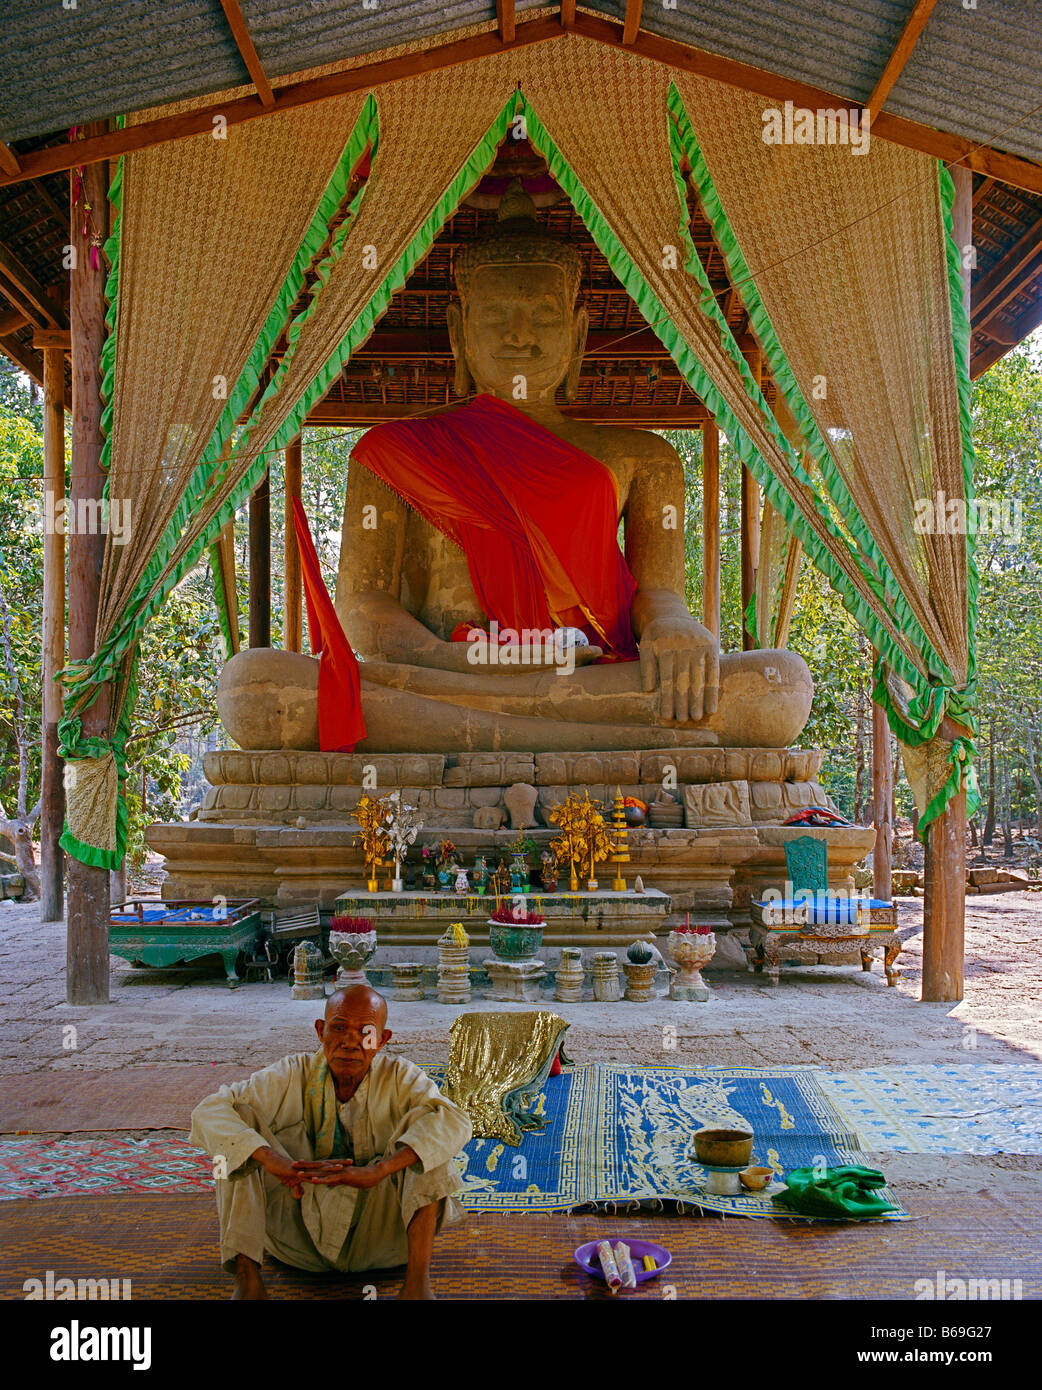 old monk in front of a roofed large buddha statue alter Mönch vor großer Buddhastatue Stock Photo